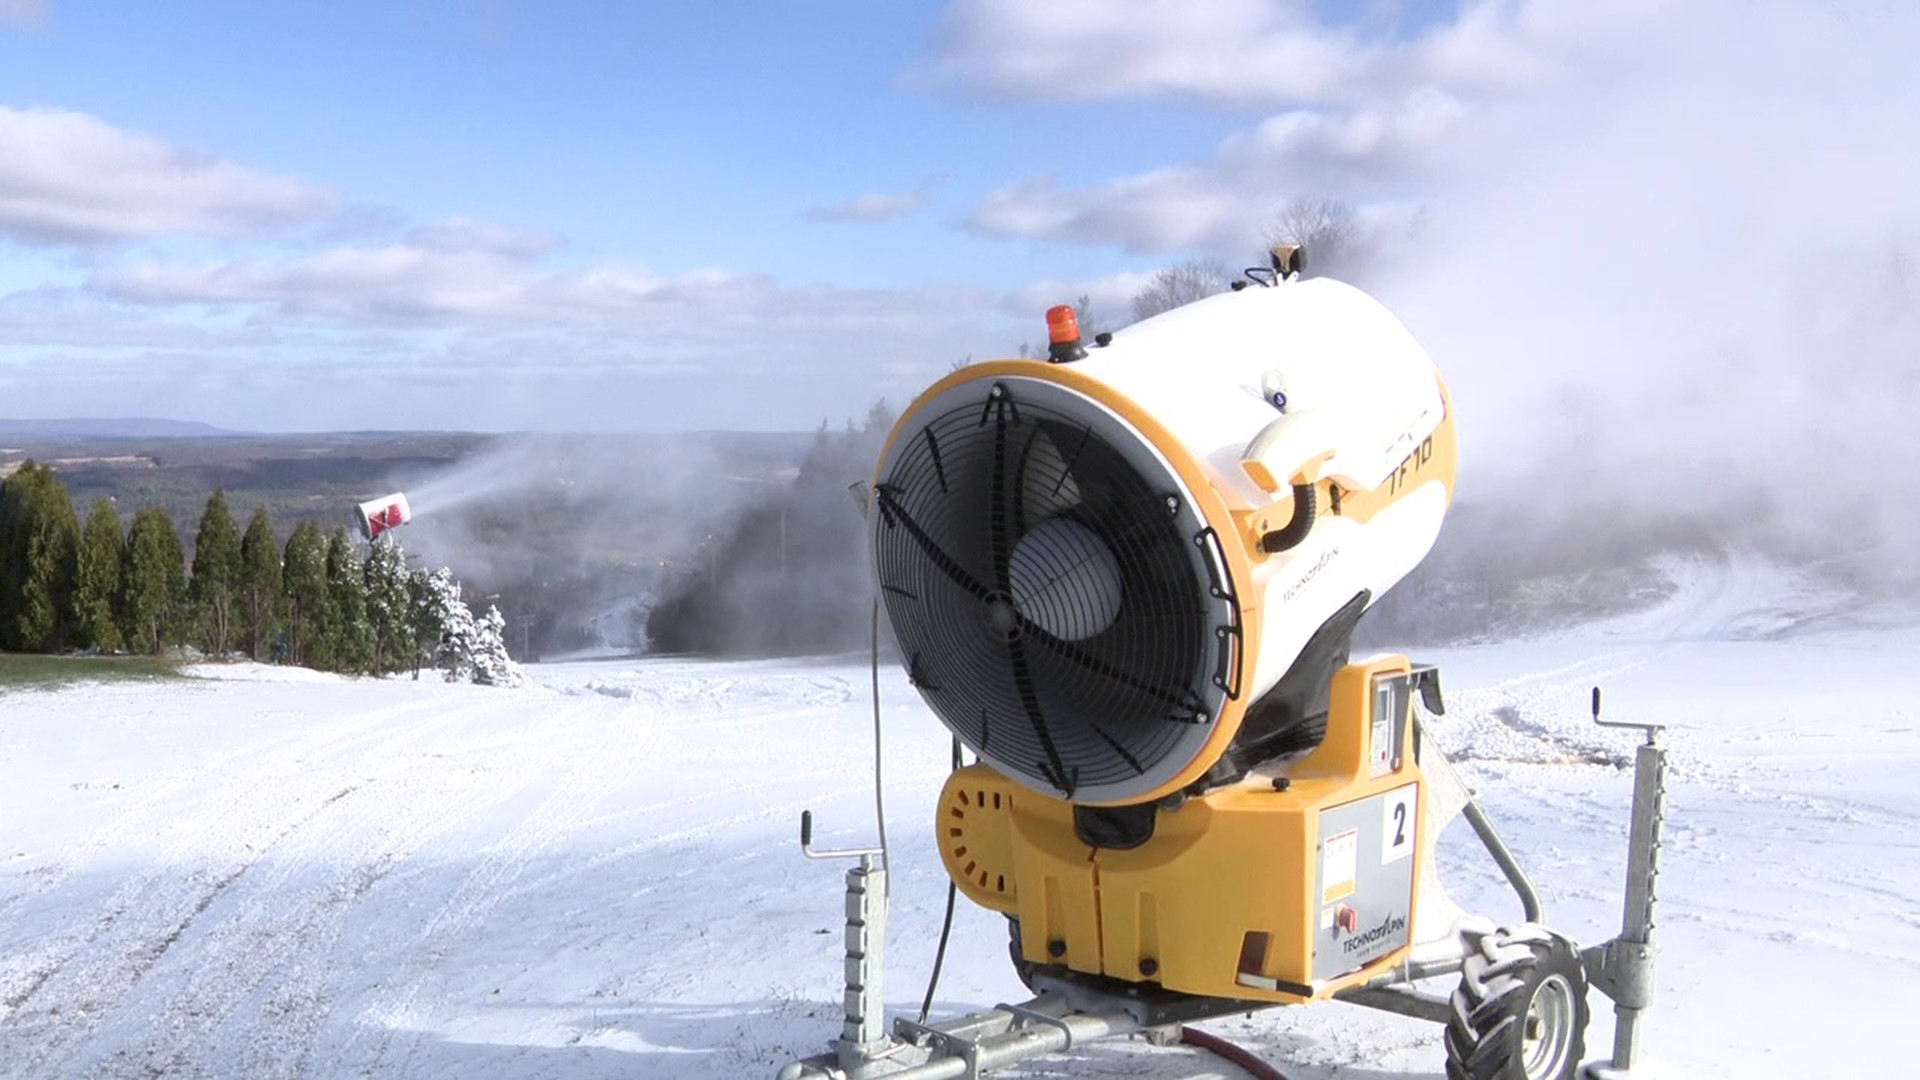 We found snowmaking crews firing up the guns, sending sprays of winter into the blue skies.